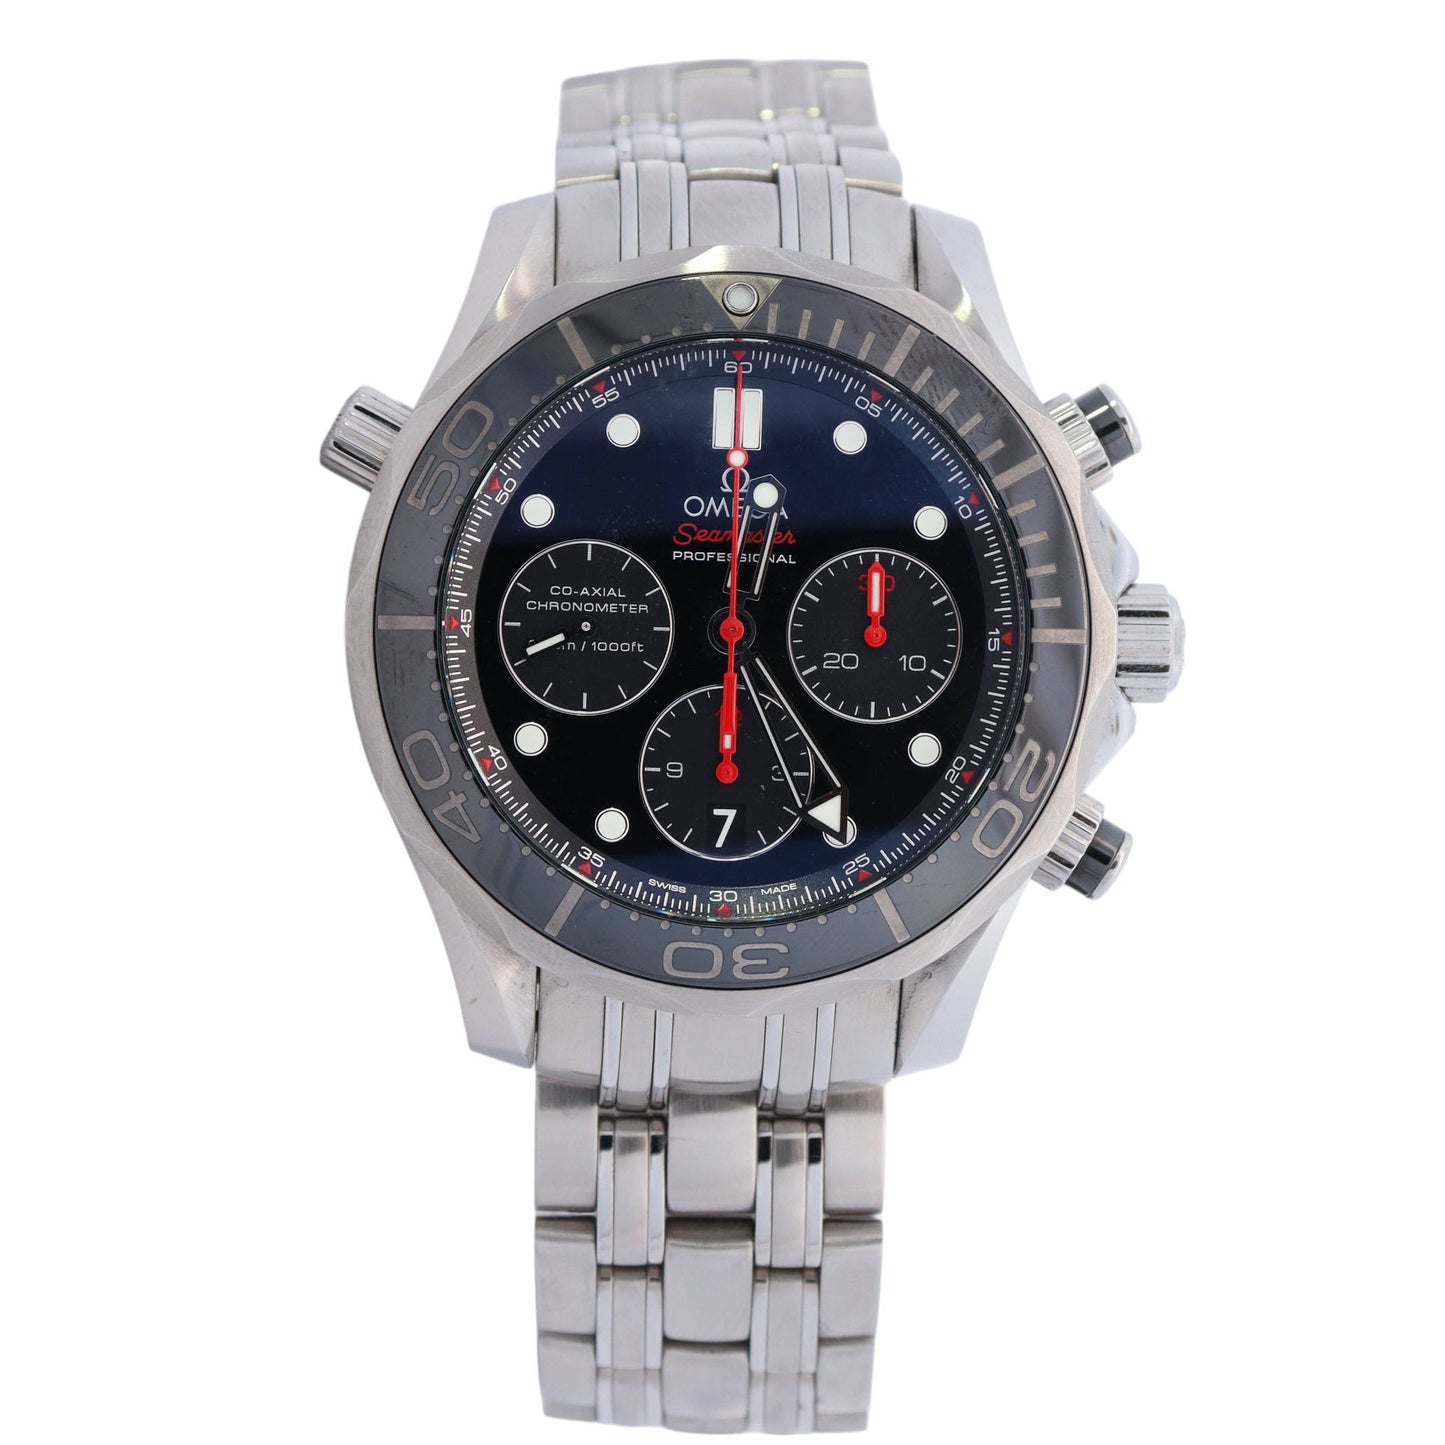 Omega Seamaster Chronograph 300m Stainless Steel 44mm Black Chronograph Dot Dial Watch  Reference #: 212.30.44.50.01.001 - Happy Jewelers Fine Jewelry Lifetime Warranty